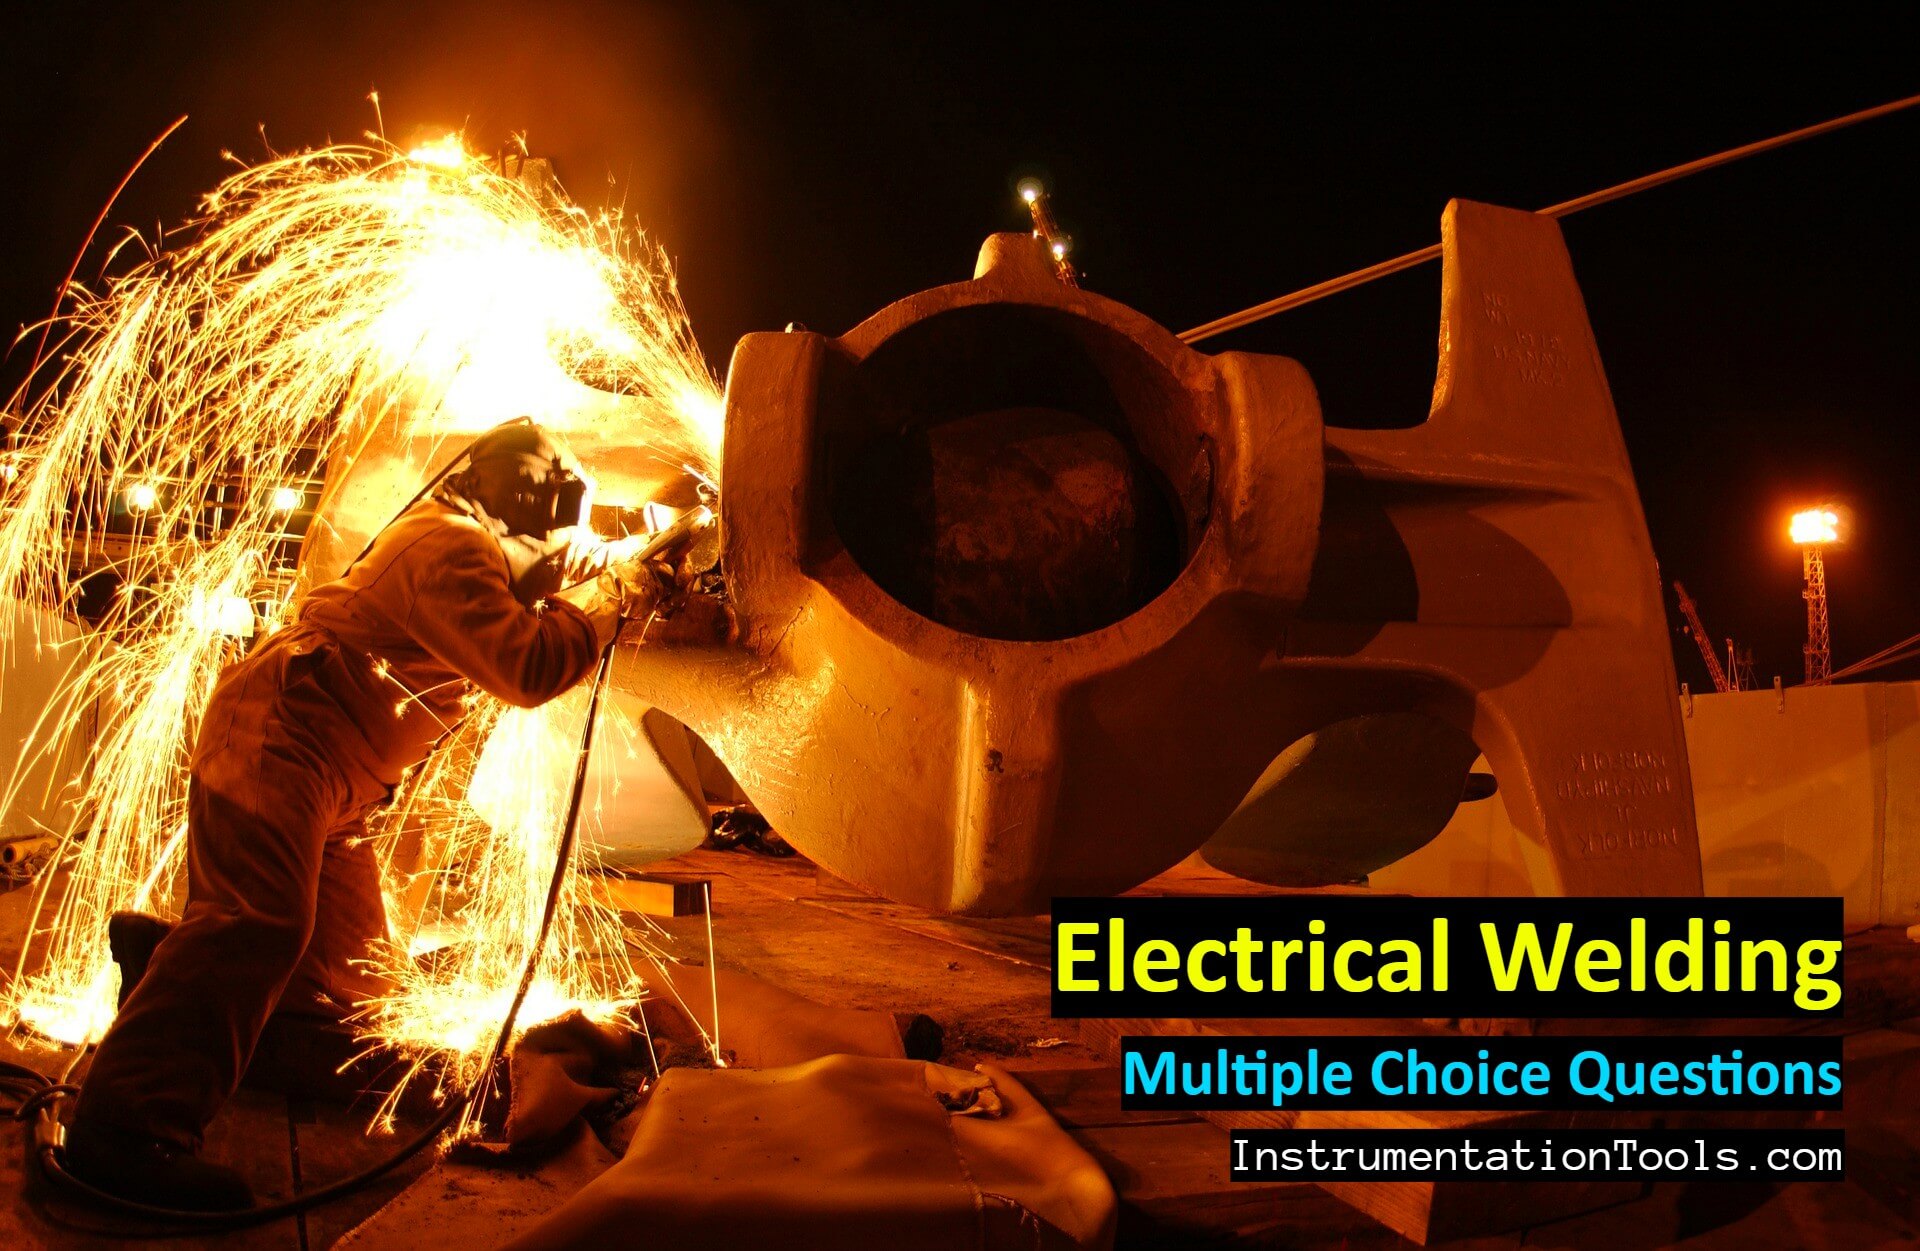 Electrical Welding Multiple Choice Questions and Answers (MCQ)